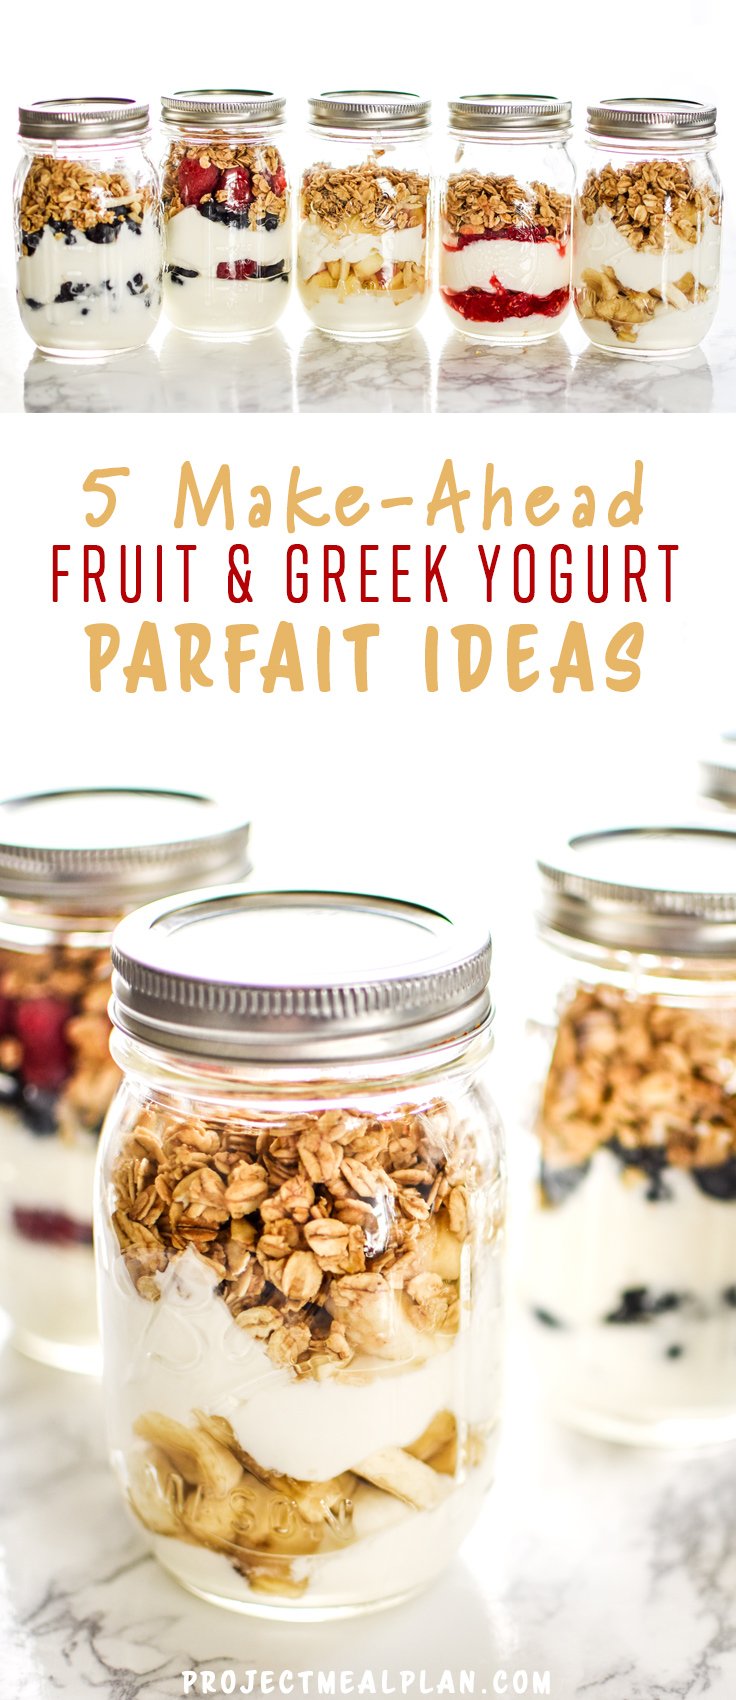 5 Make-Ahead Fruit & Greek Yogurt Parfait Ideas to Try for Breakfast - Greek yogurt with just a hint of sweetness, layered with fruits and topped with granola, 5 WAYS!! Prep ahead and grab it on your way out the door tomorrow! - ProjectMealPlan.com #mealprepping #mealprepsunday #masonjarparfaits #greekyogurtparfait